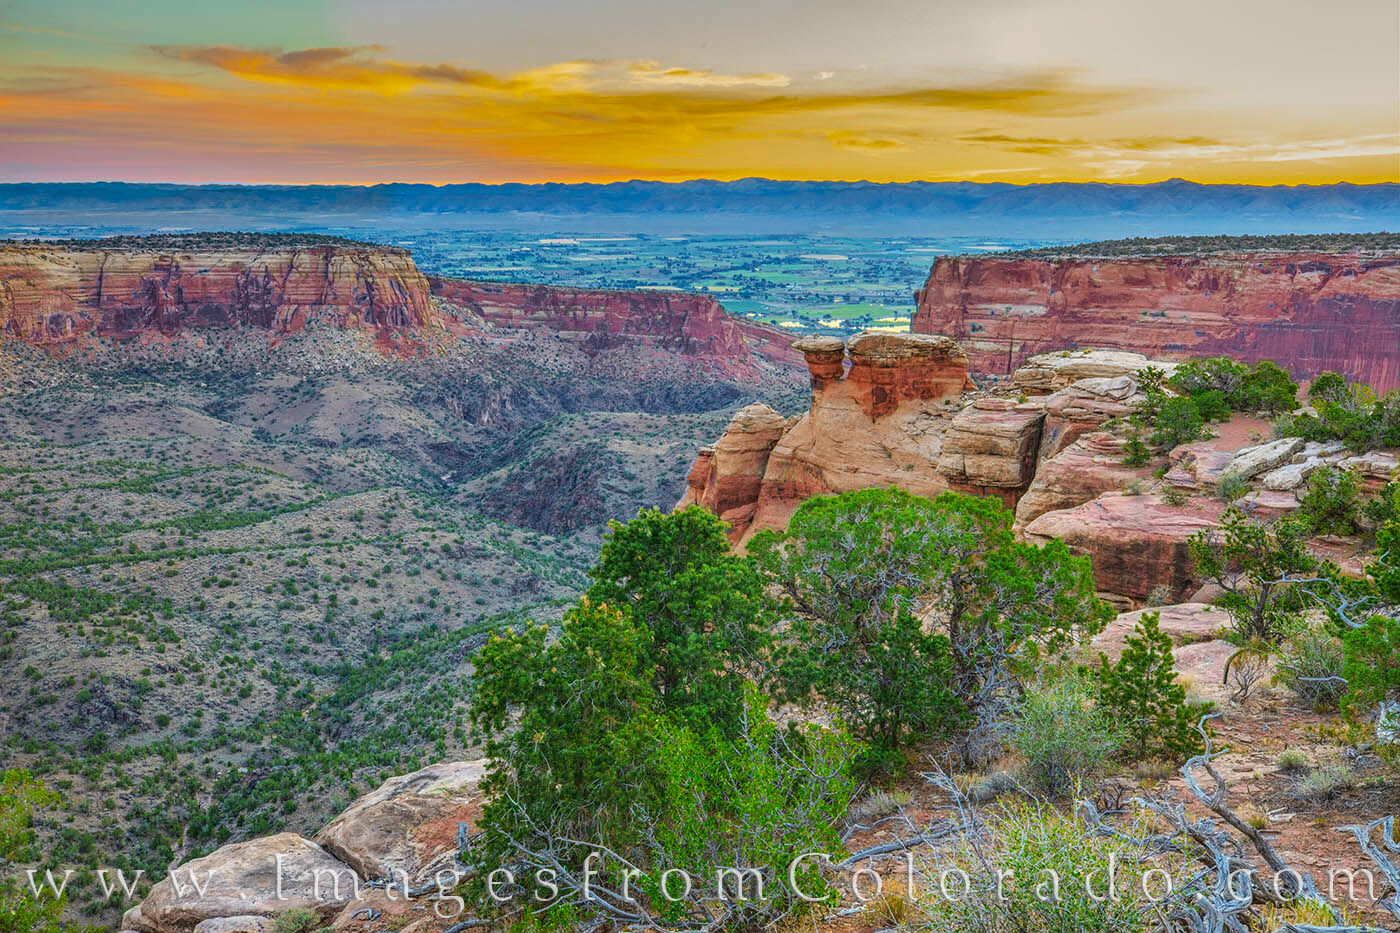 The depth and colors of Monument Canyon, one of the beautiful canyons of Colorado National Monunent, is seen here at sunrise...